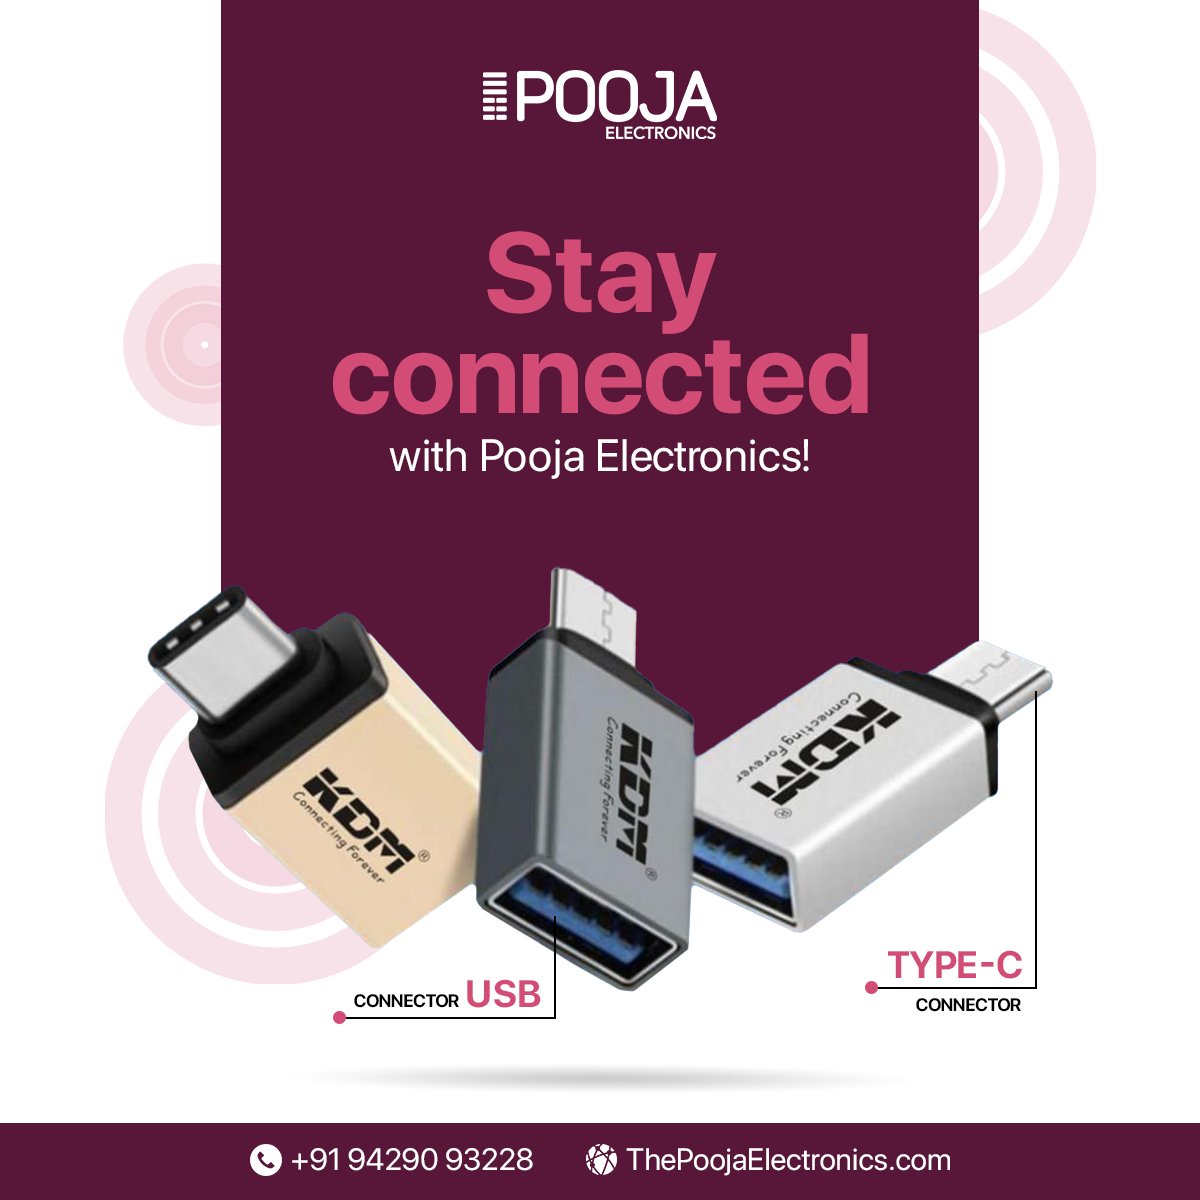 Stay Connected, Anywhere, Anytime: Use this product Type C to USB Connector!!
.
#connectors #connectionmatters #USBConnector #UniversalConnectivity #TypeCCompatibility #FastDataTransfer #VersatileConnectivity #USBTypeCConnector #ConnectWithEase #TypeCTech #EfficientConnectivity